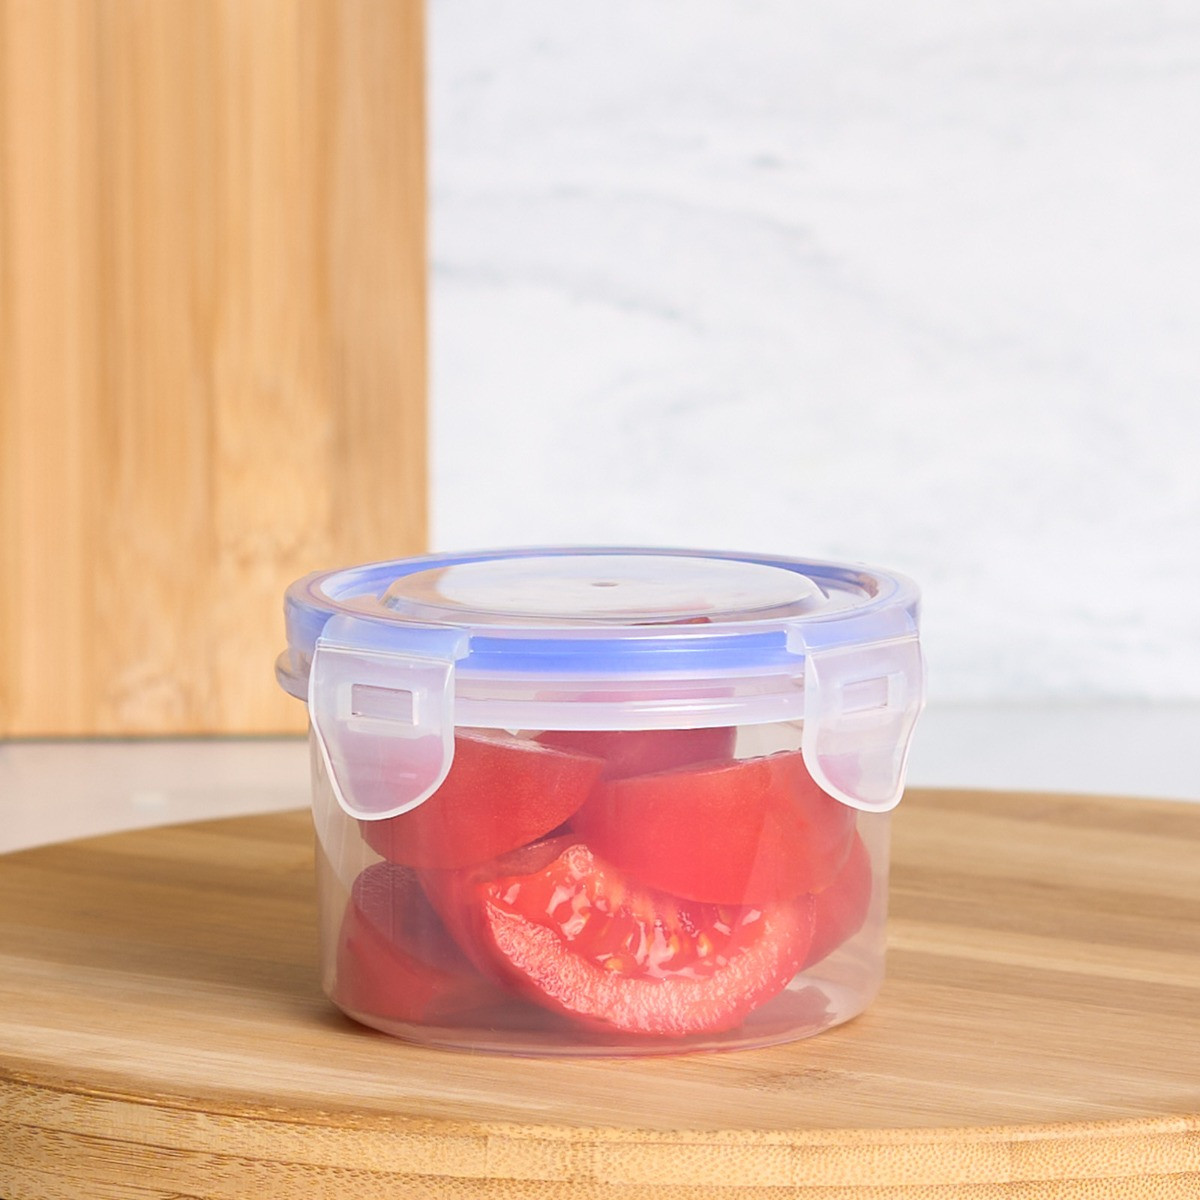  OHS Round Plastic Tupperware Set, 3 Piece - Clear>